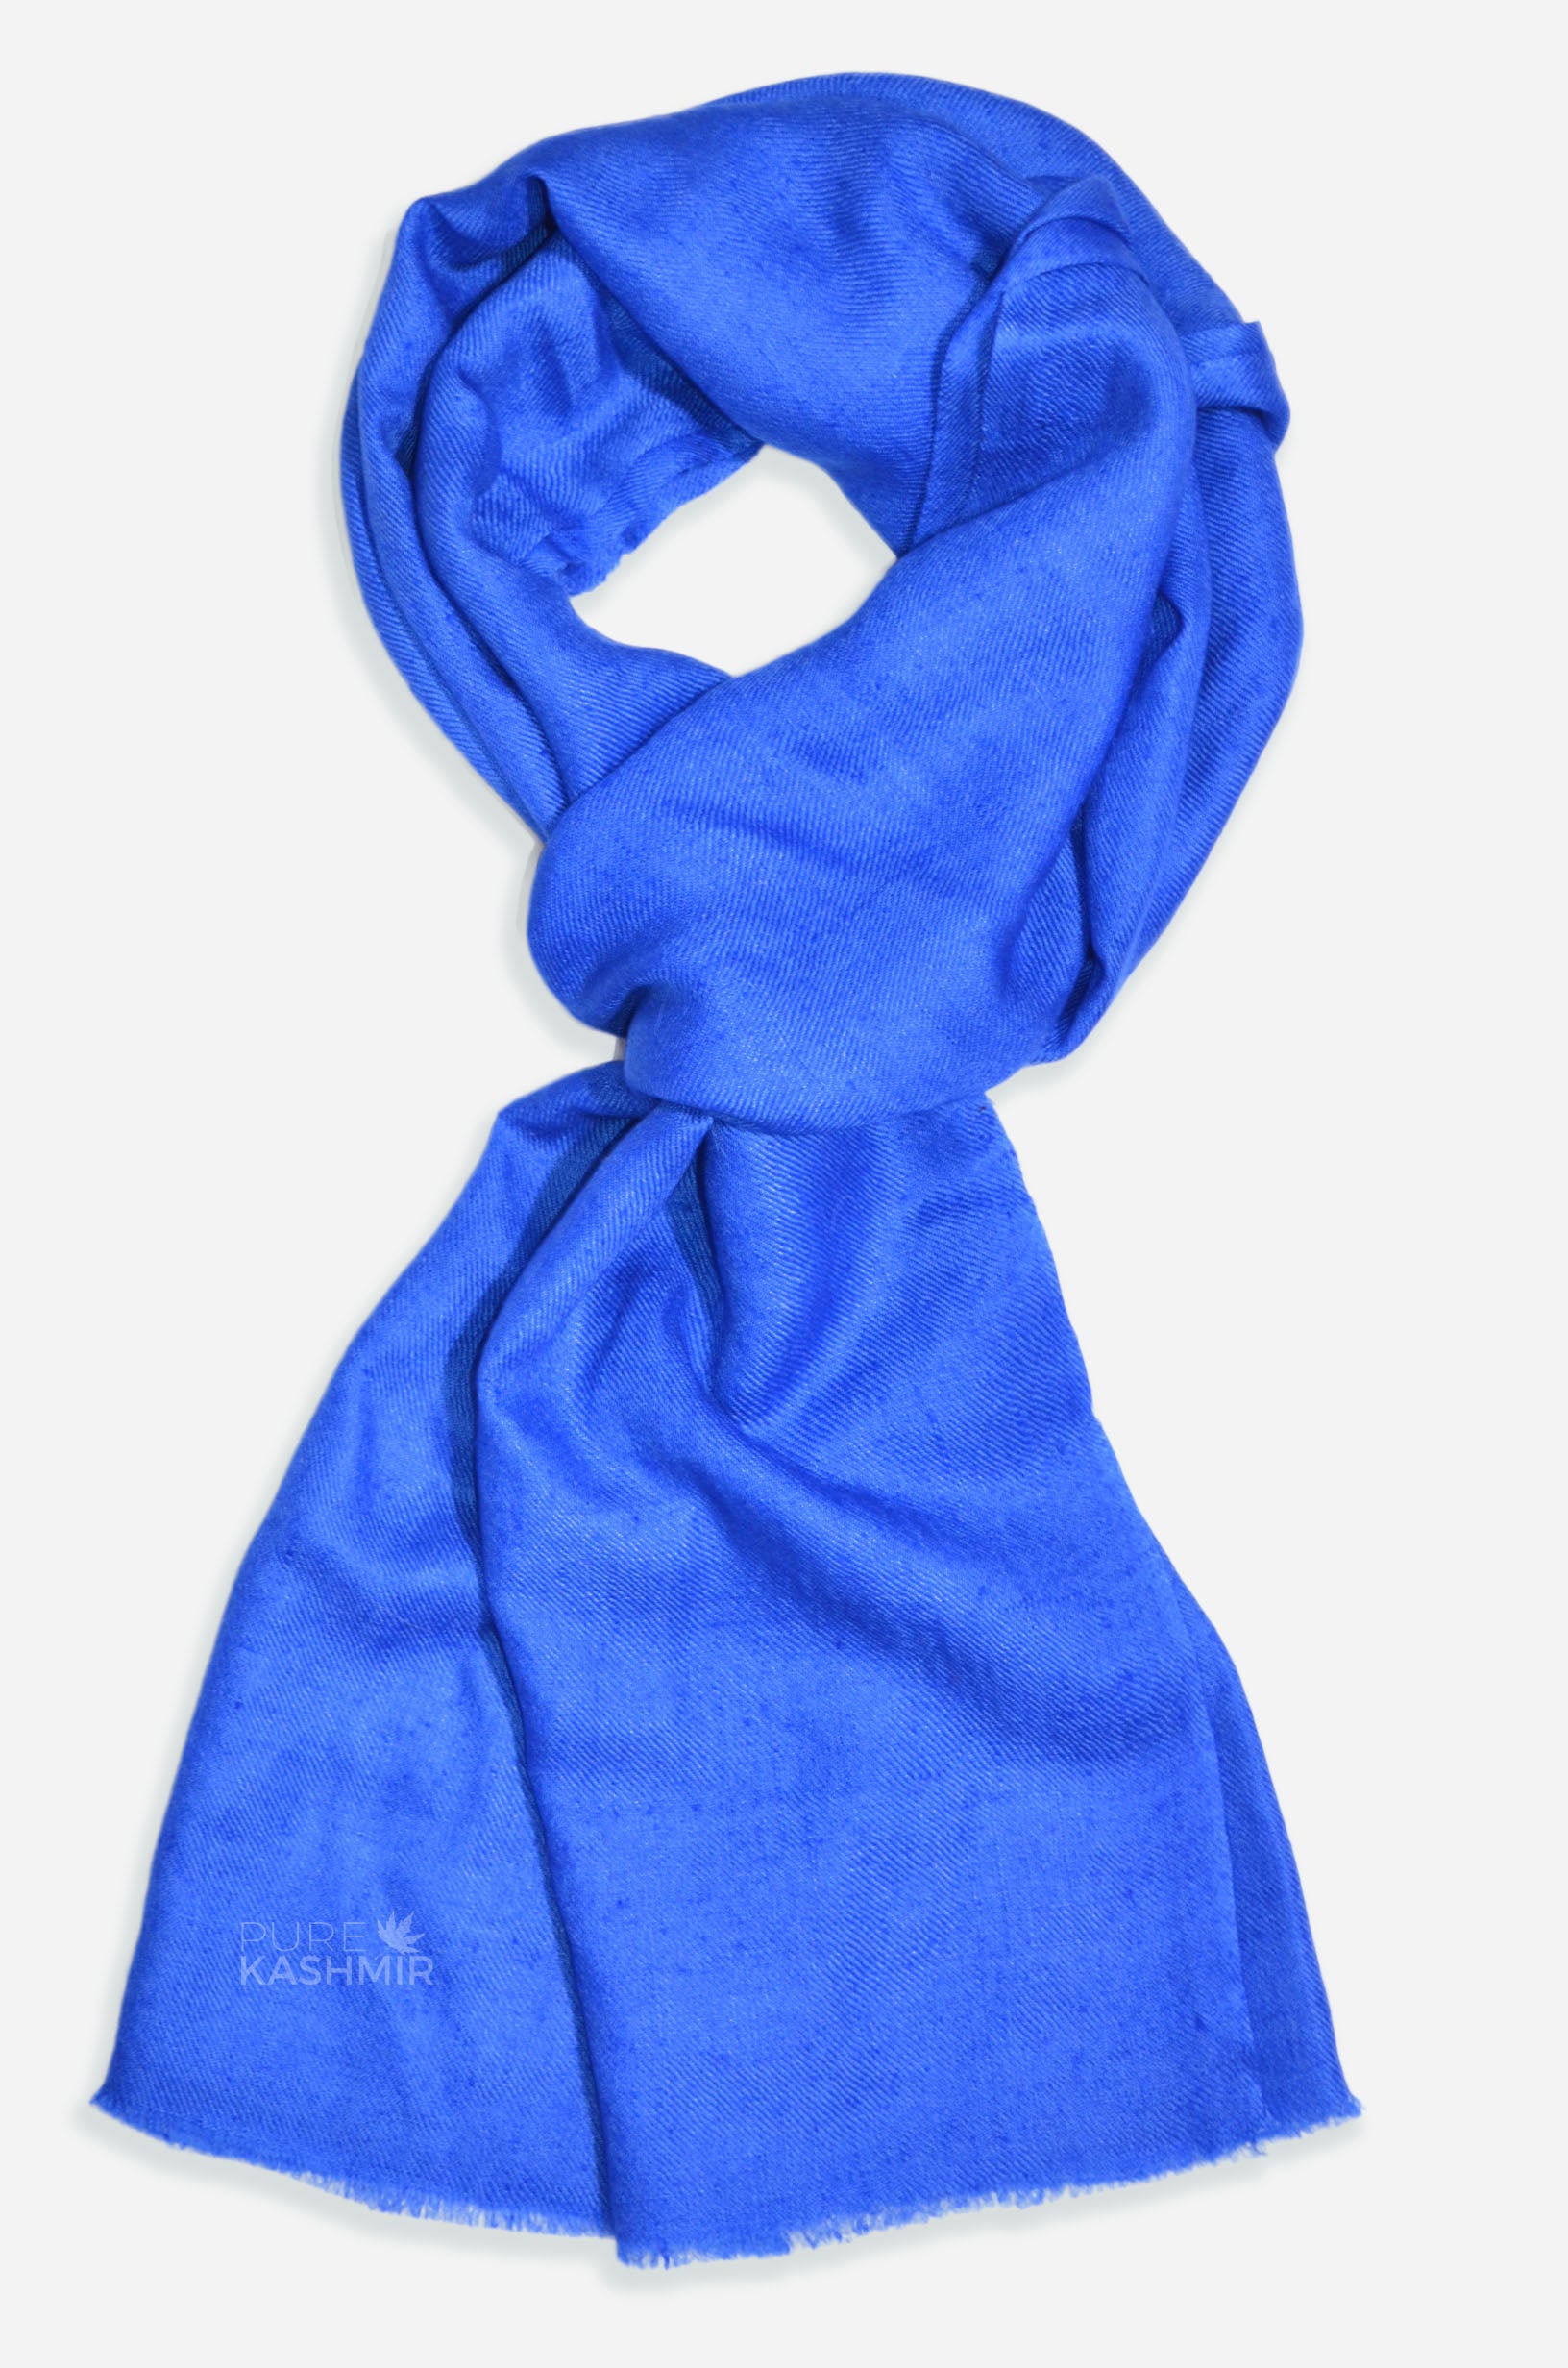 Cashmere and Silk Blend Large Scarf Shawl, Cashmere Silk Wrap Shawl Scarves, Wholesale Cashmere and Silk Wrap Scarf Shawl